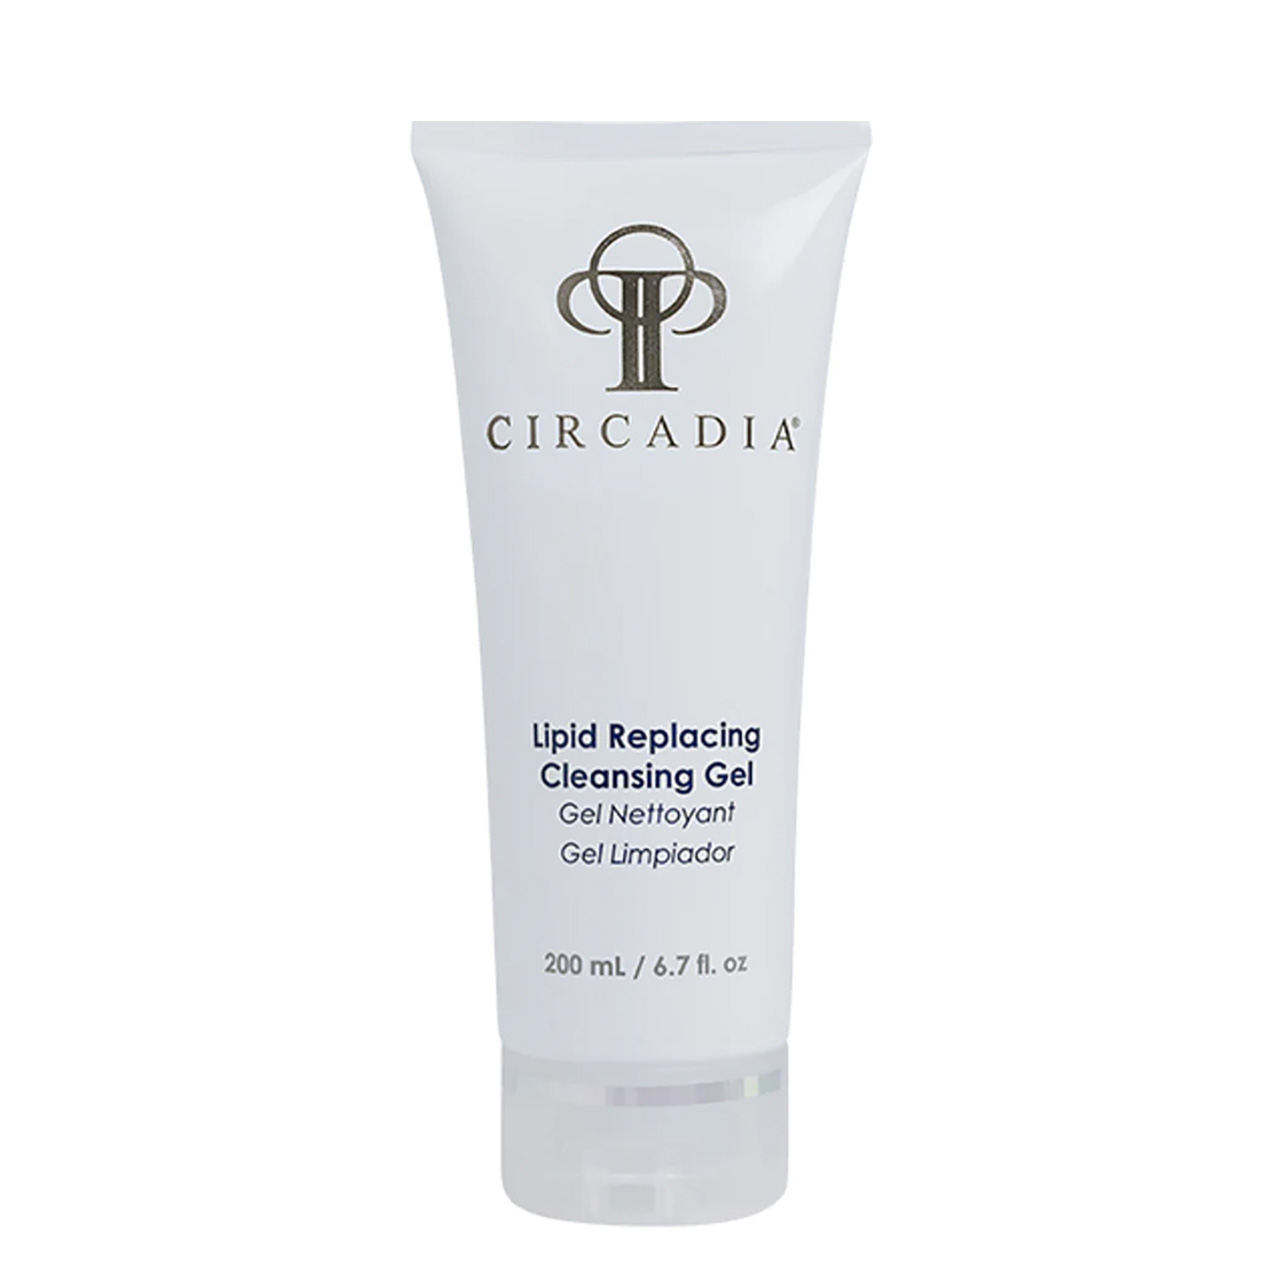 Circadia Lipid Replacing Cleansing Gel - 6.7 oz (62146) Questions & Answers